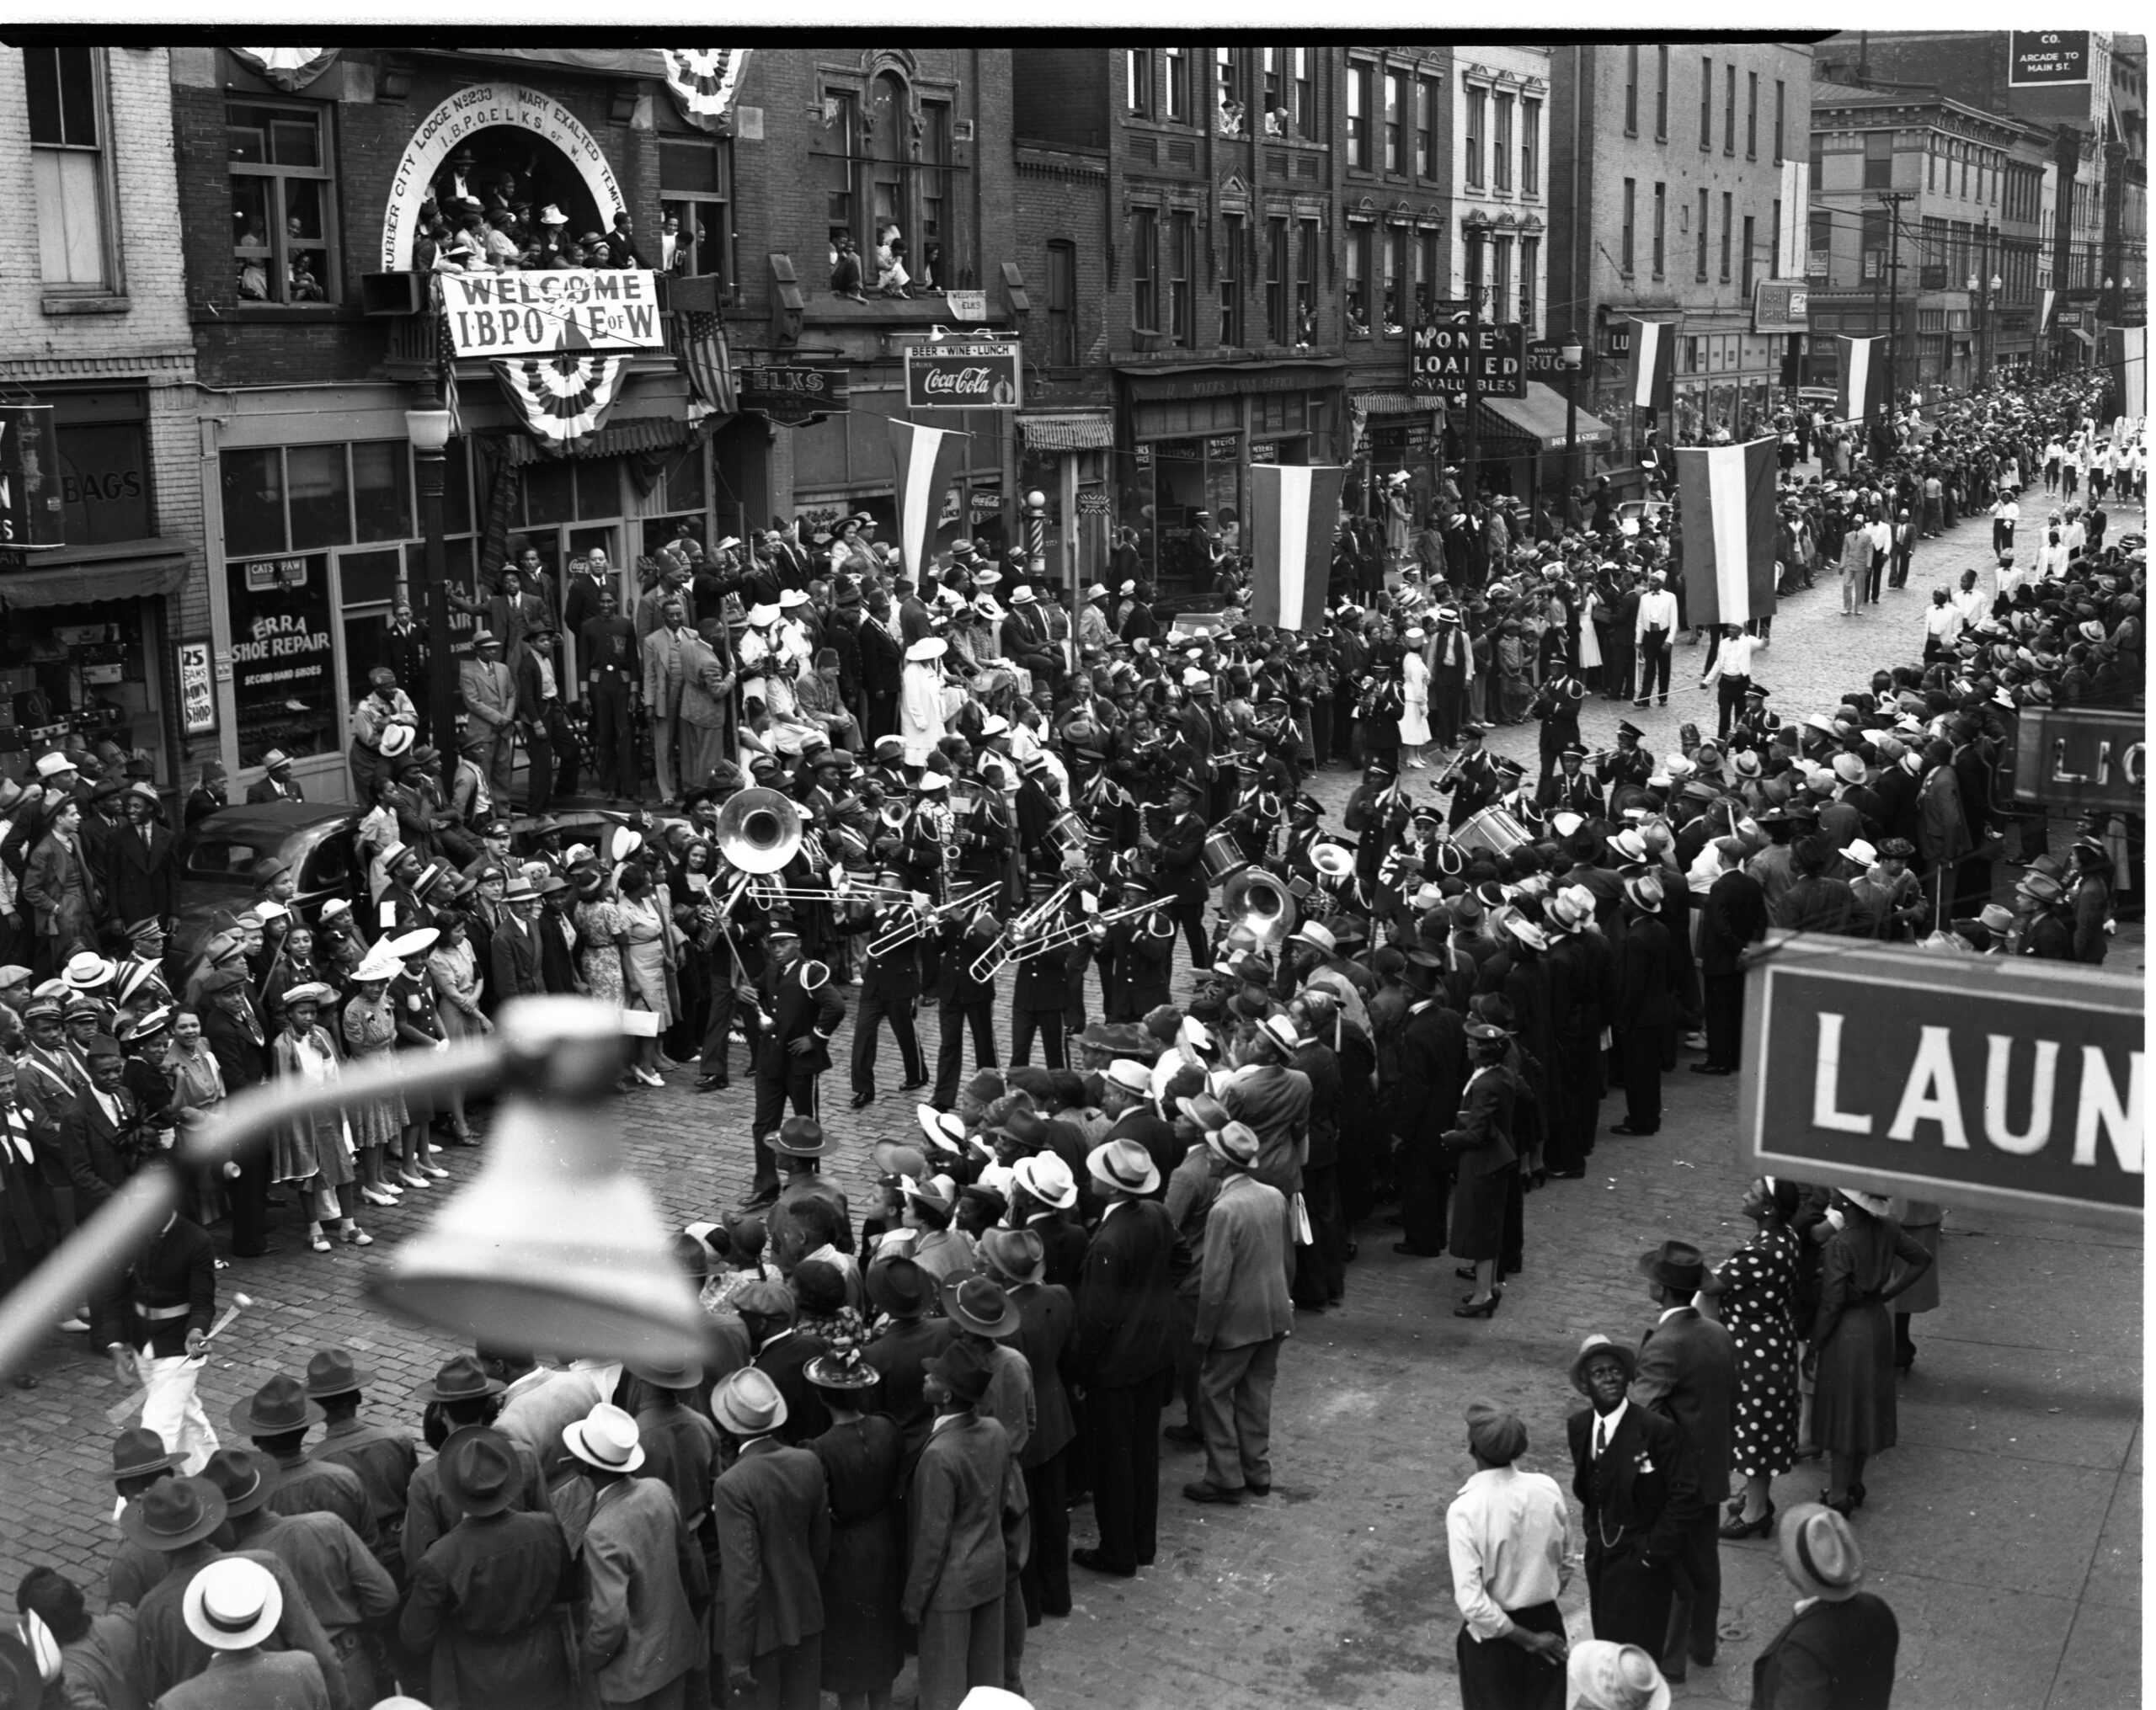 An archival black and white photo of a strett parade with a brass band and crowds all over the street.